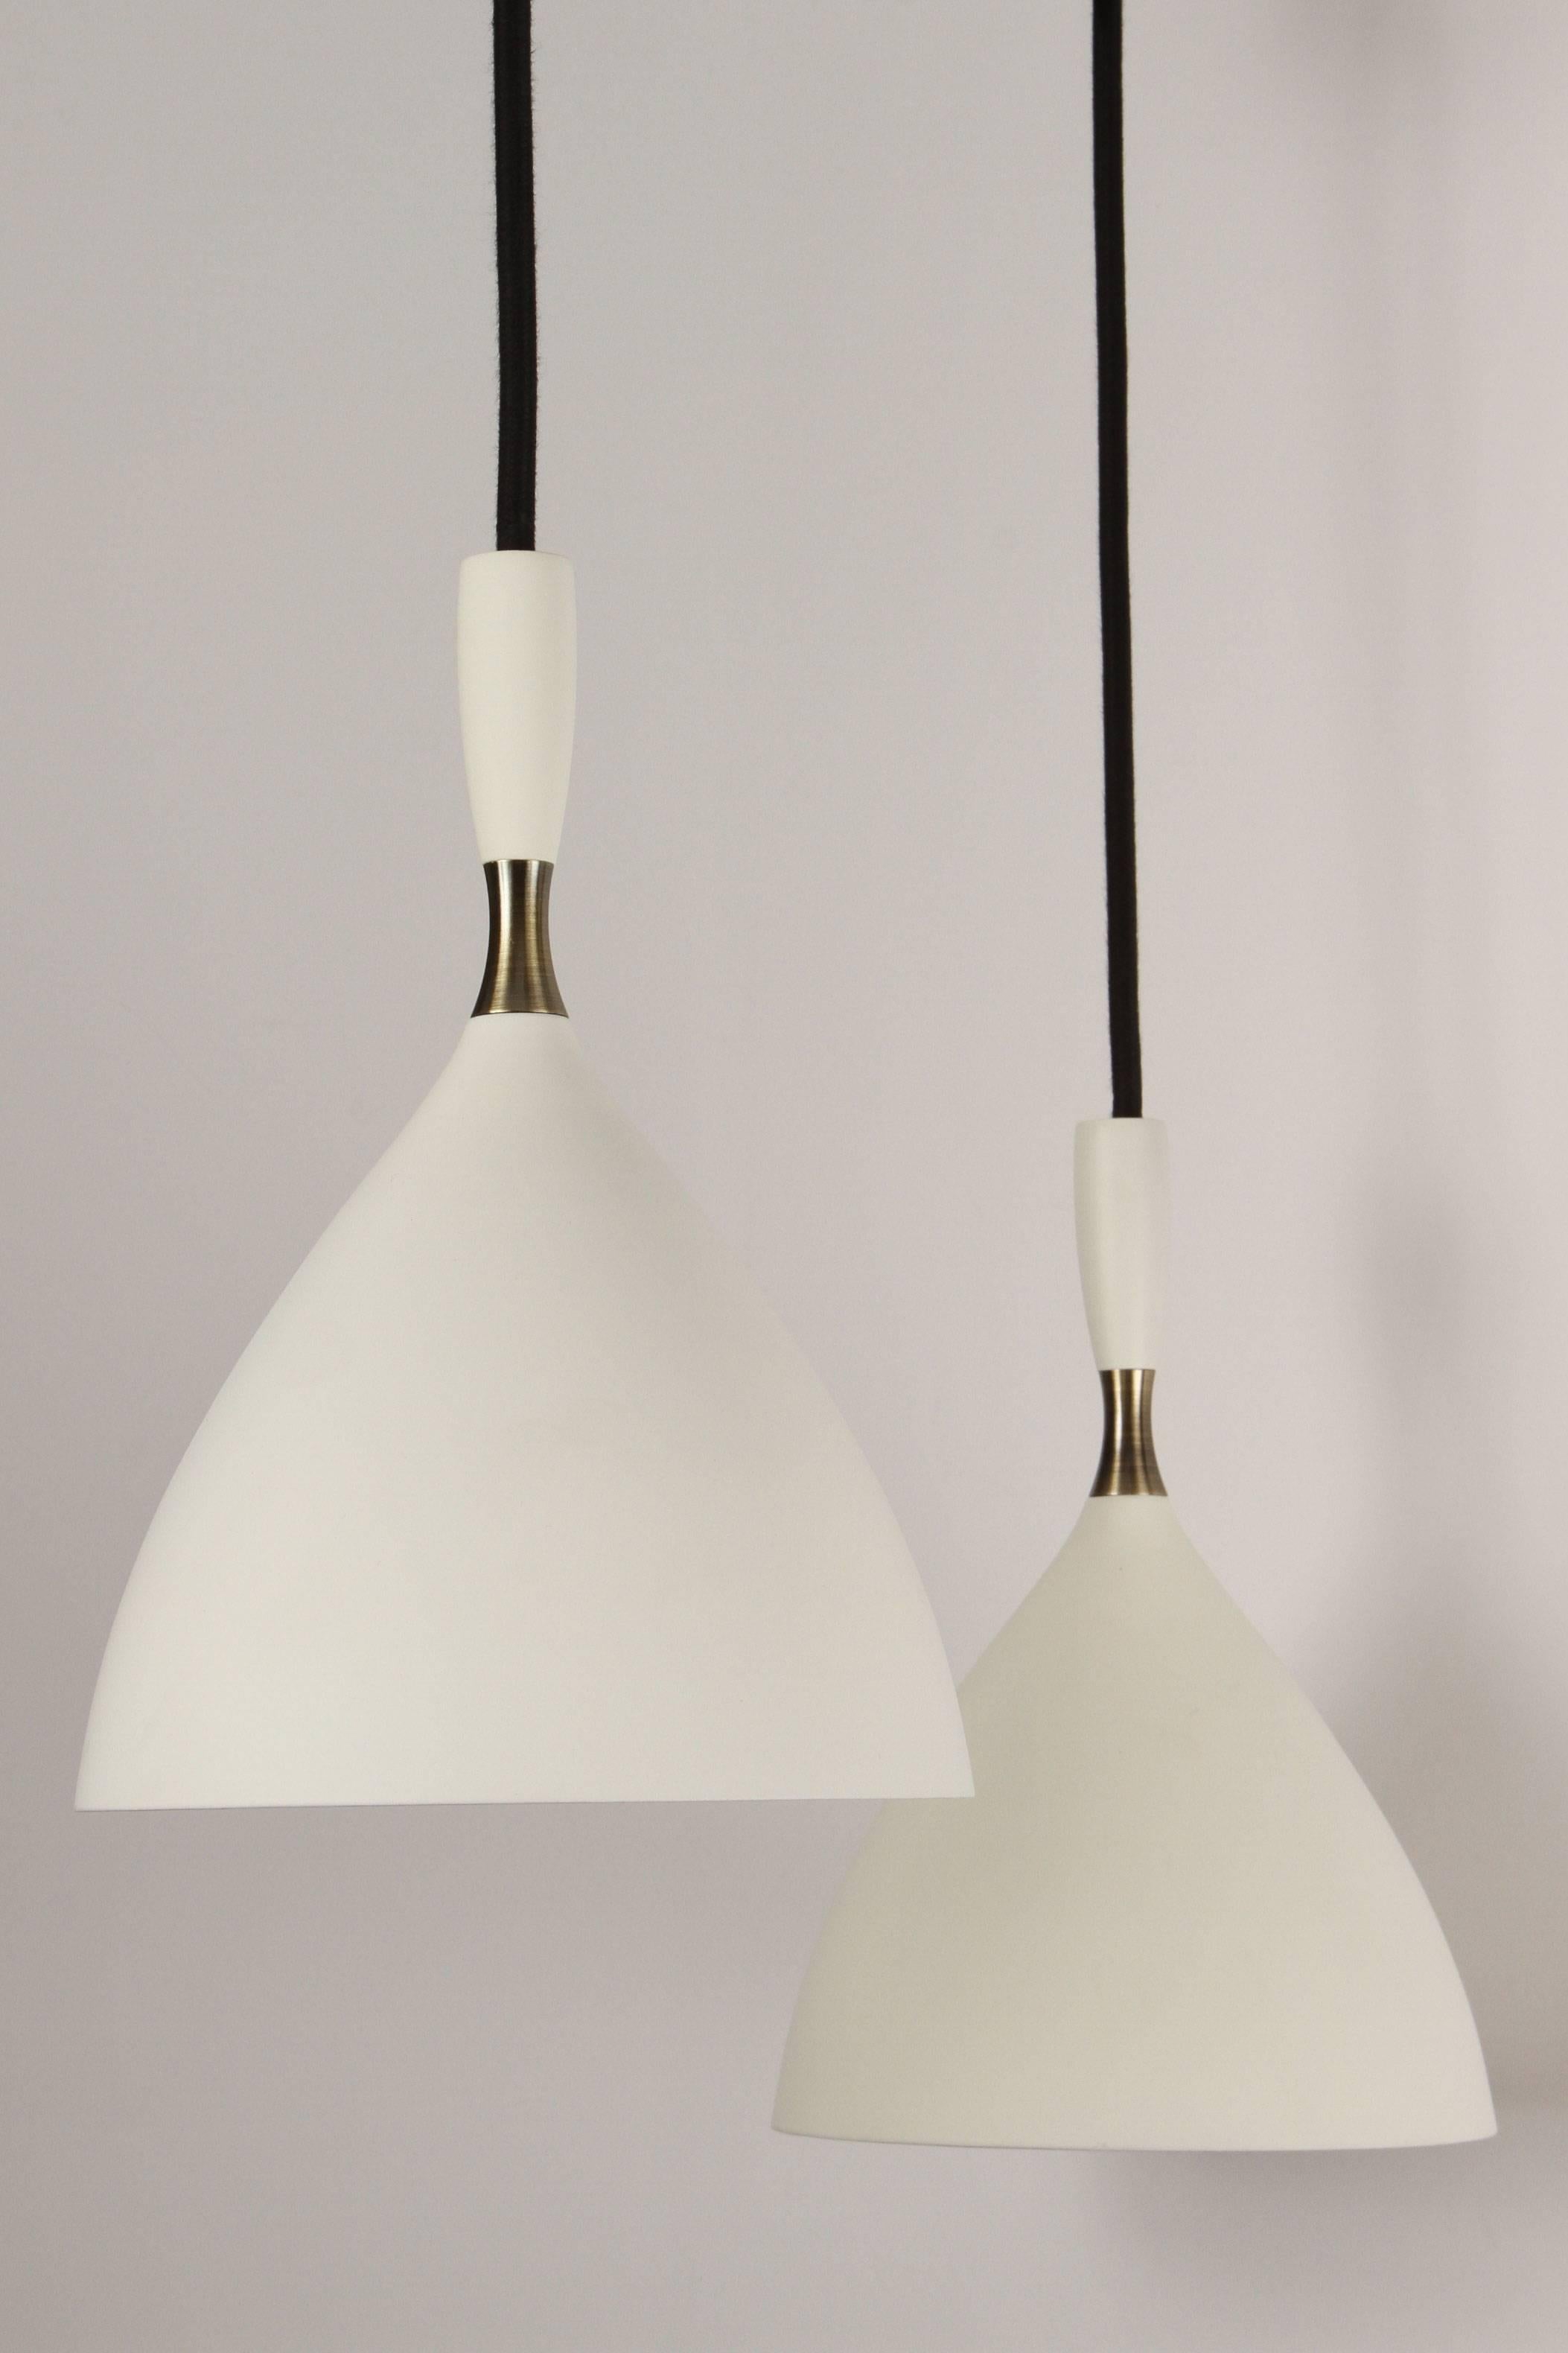 Birger Dahl pendants in the manner of Stilnovo. Architectural pendant lights designed, circa 1954 and executed in white enameled metal with exquisite brass detail. 36